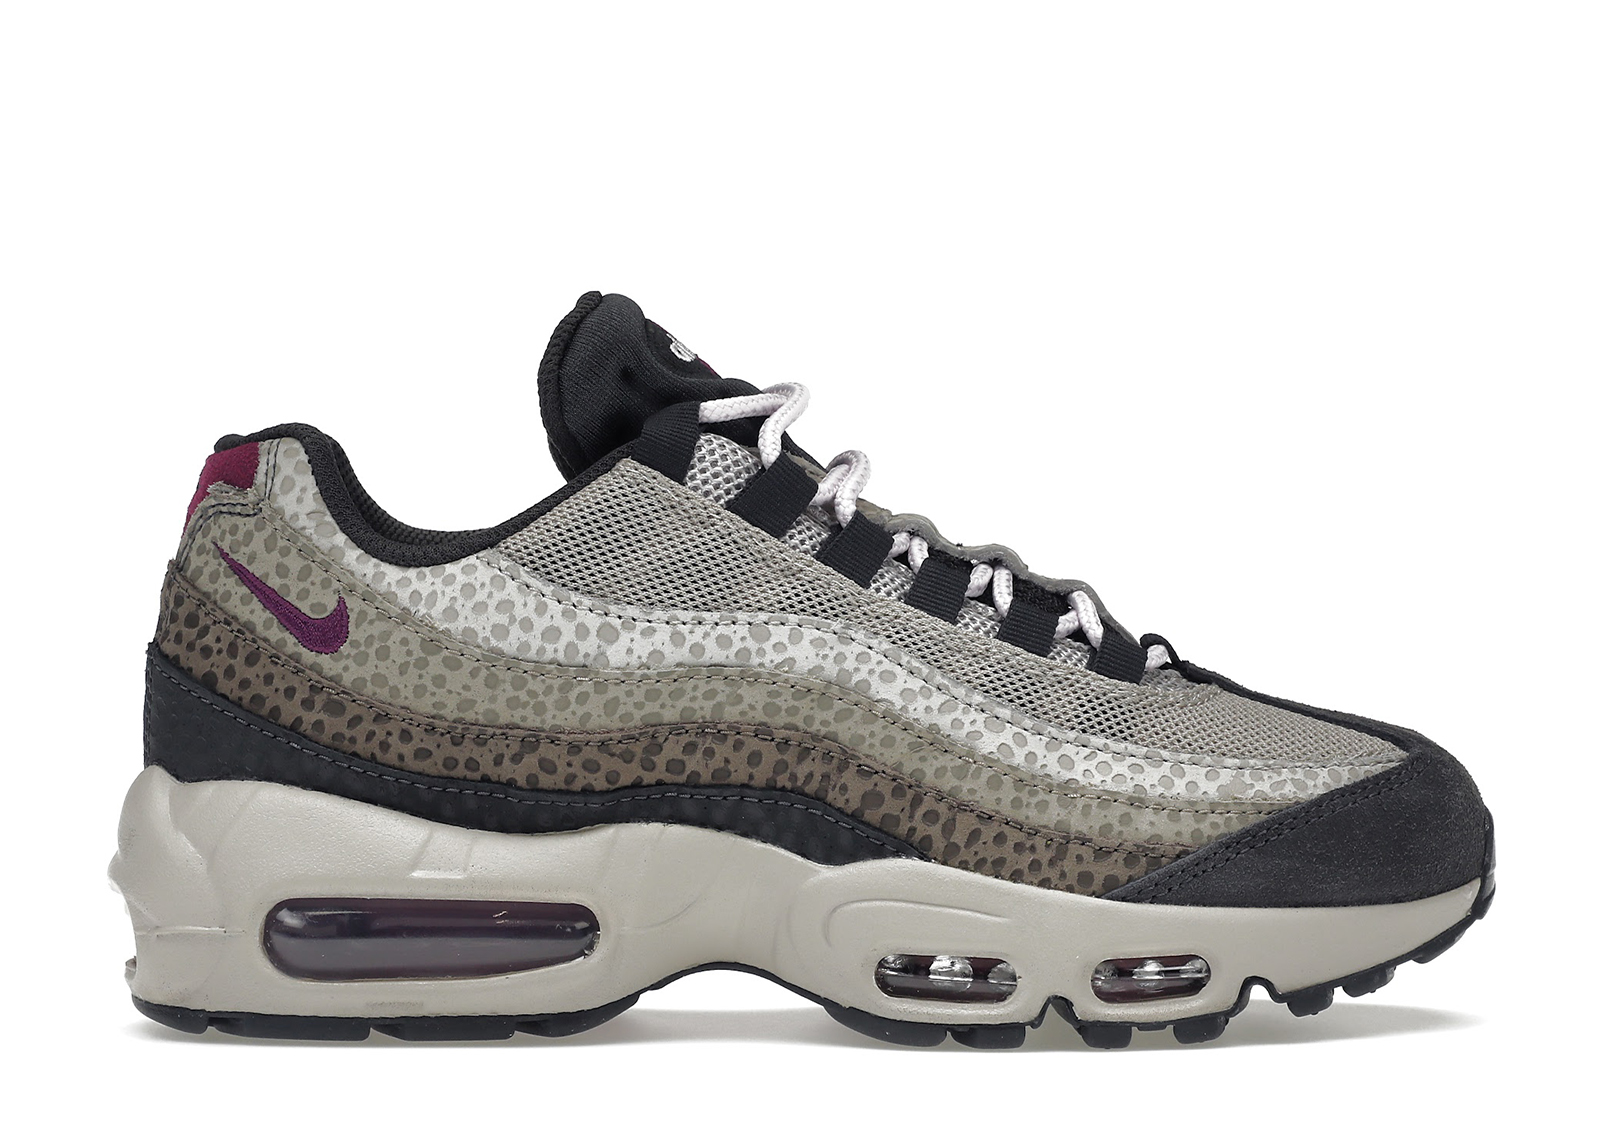 Nike Air Max 95 Viotech Anthracite (Women's) - DX2955-001 - US